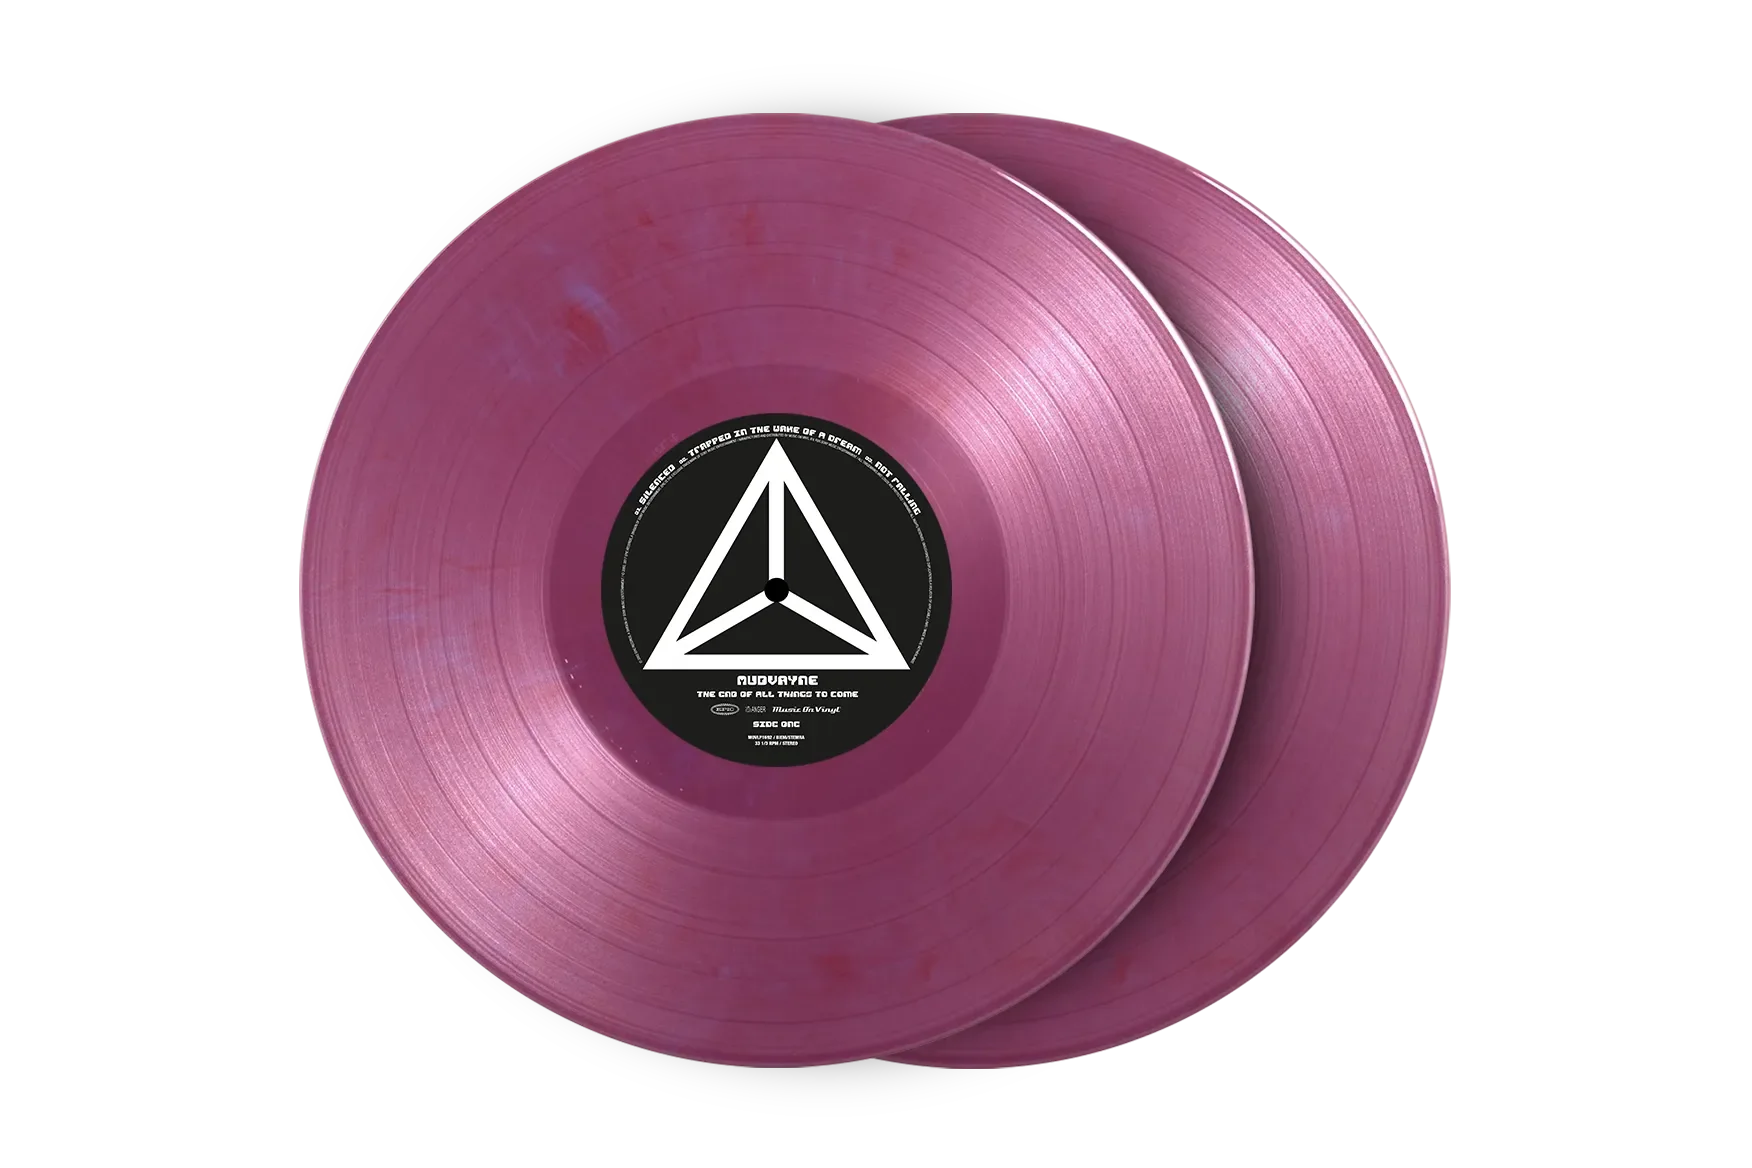 MUDVAYNE - The End Of All Things To Come (2024 Reissue) - 2LP - 180g Purple Marbled Vinyl [JUN 14]